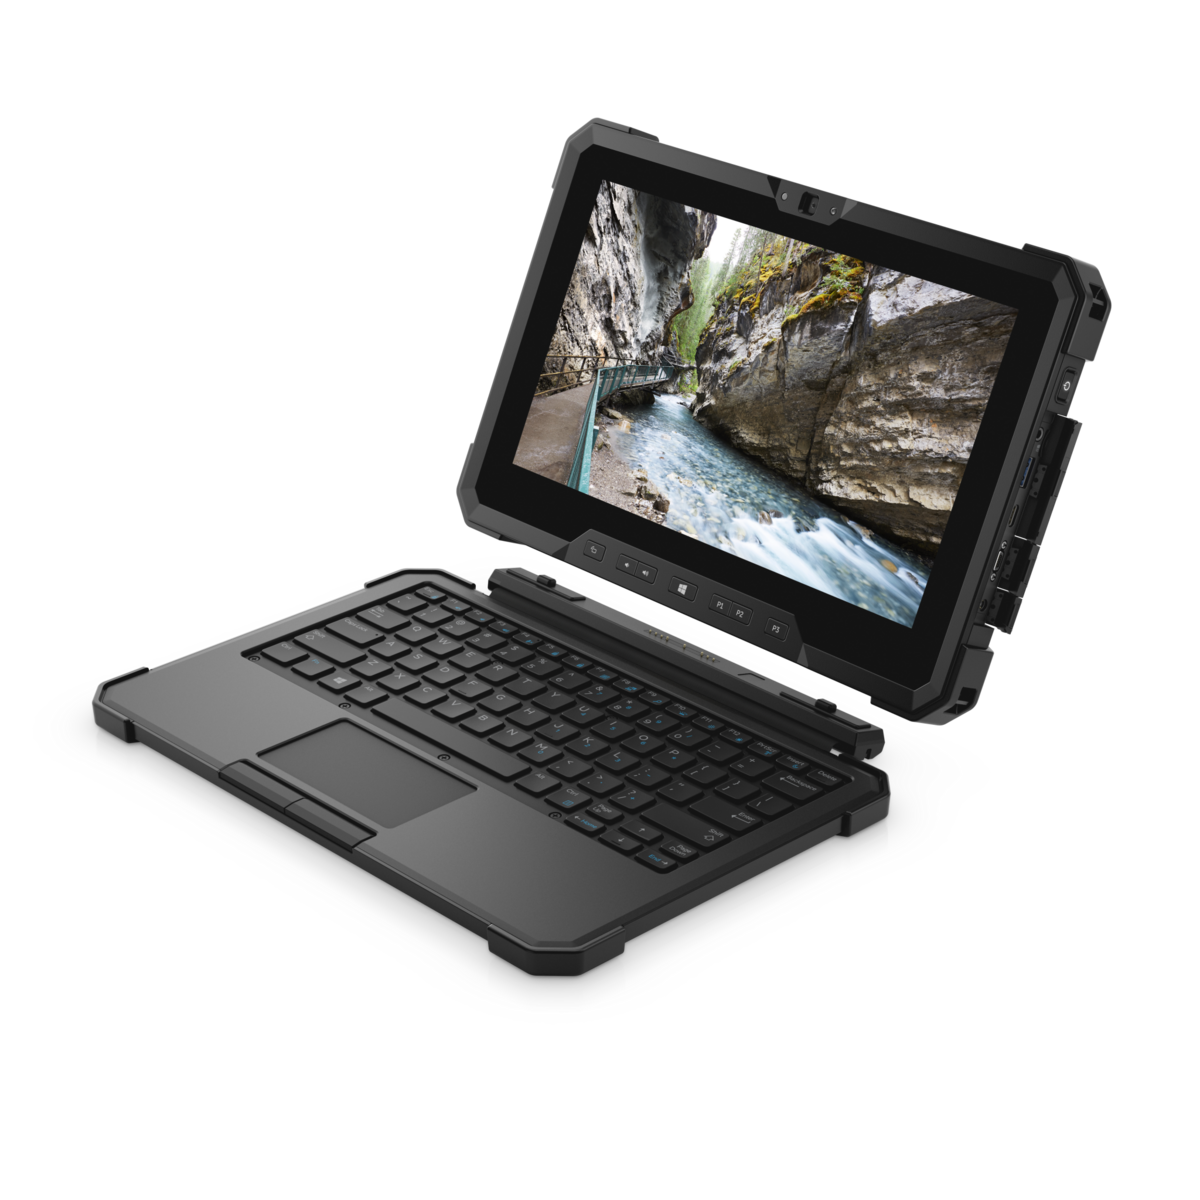 Dell rolls out the Latitude 7212 Rugged Extreme Tablet News